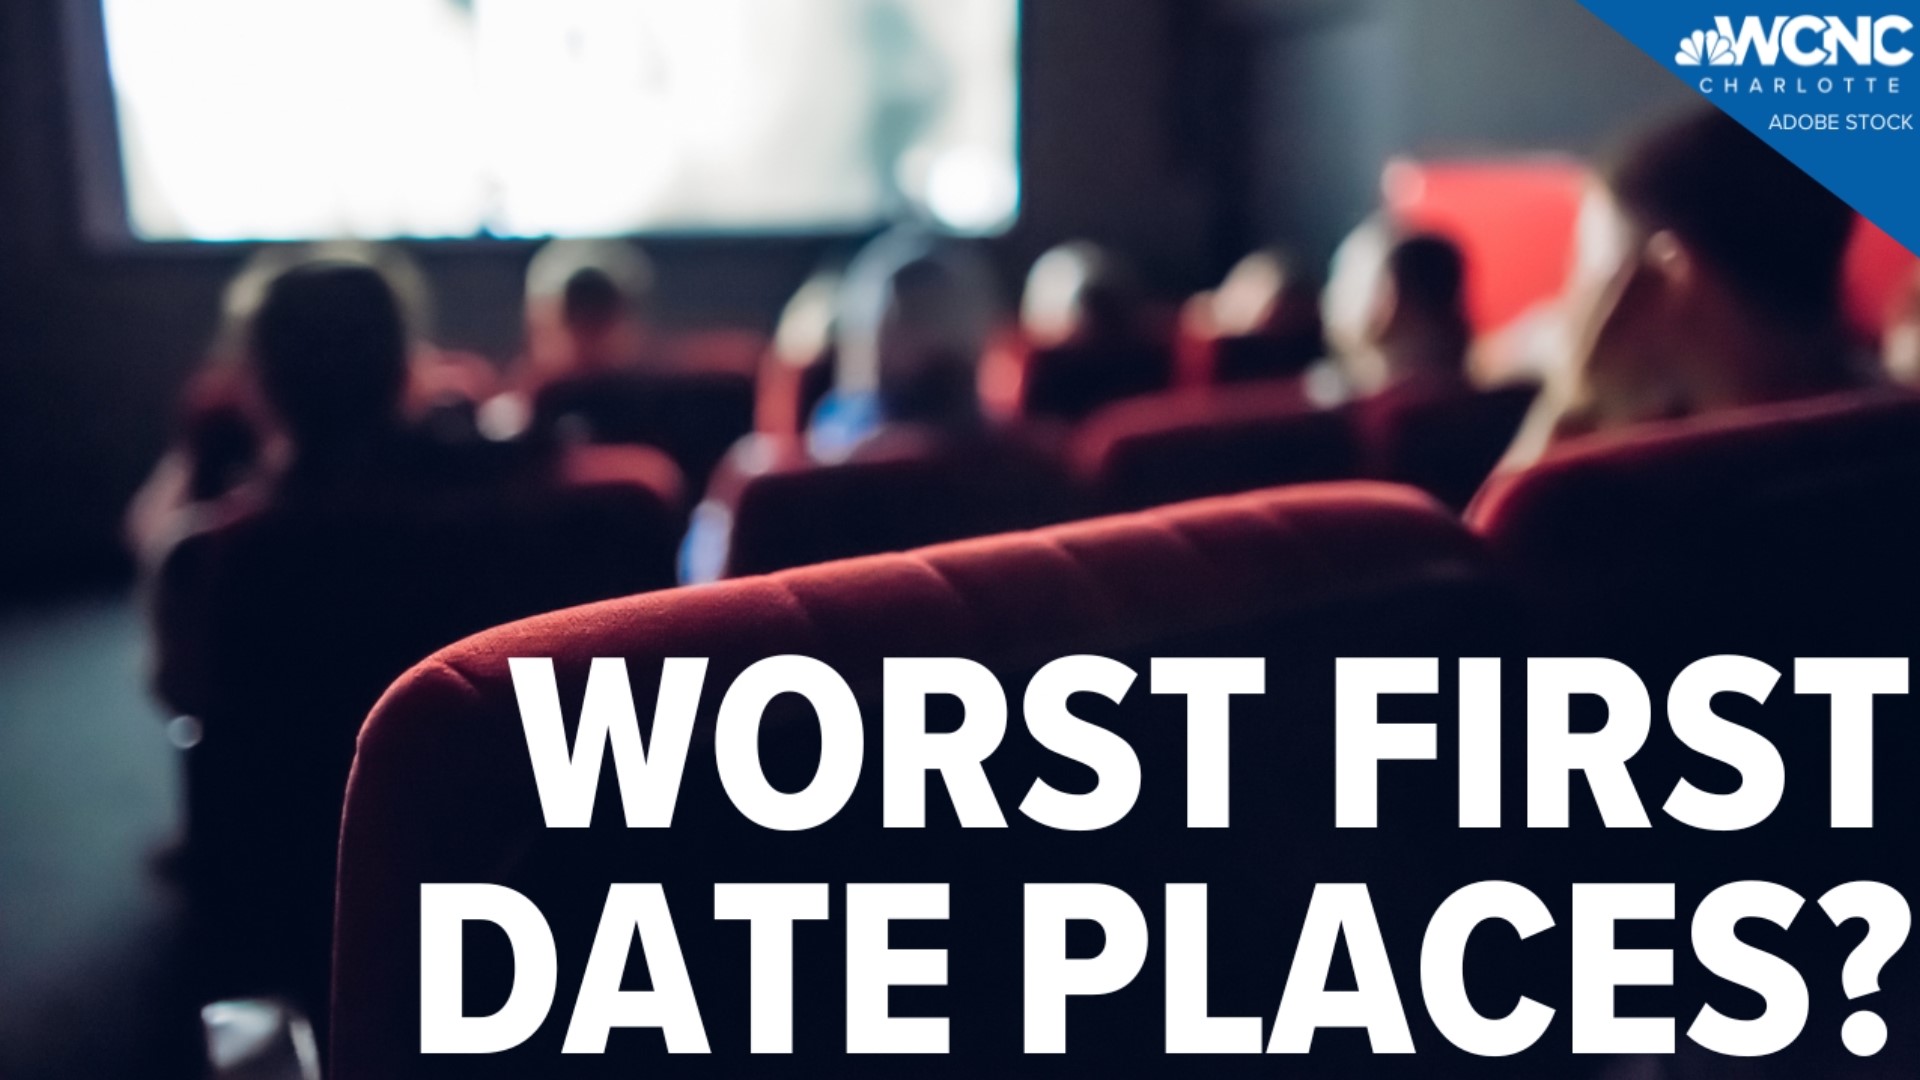 Here are some places you shouldn't take a first date, according to a poll out of the U.K.